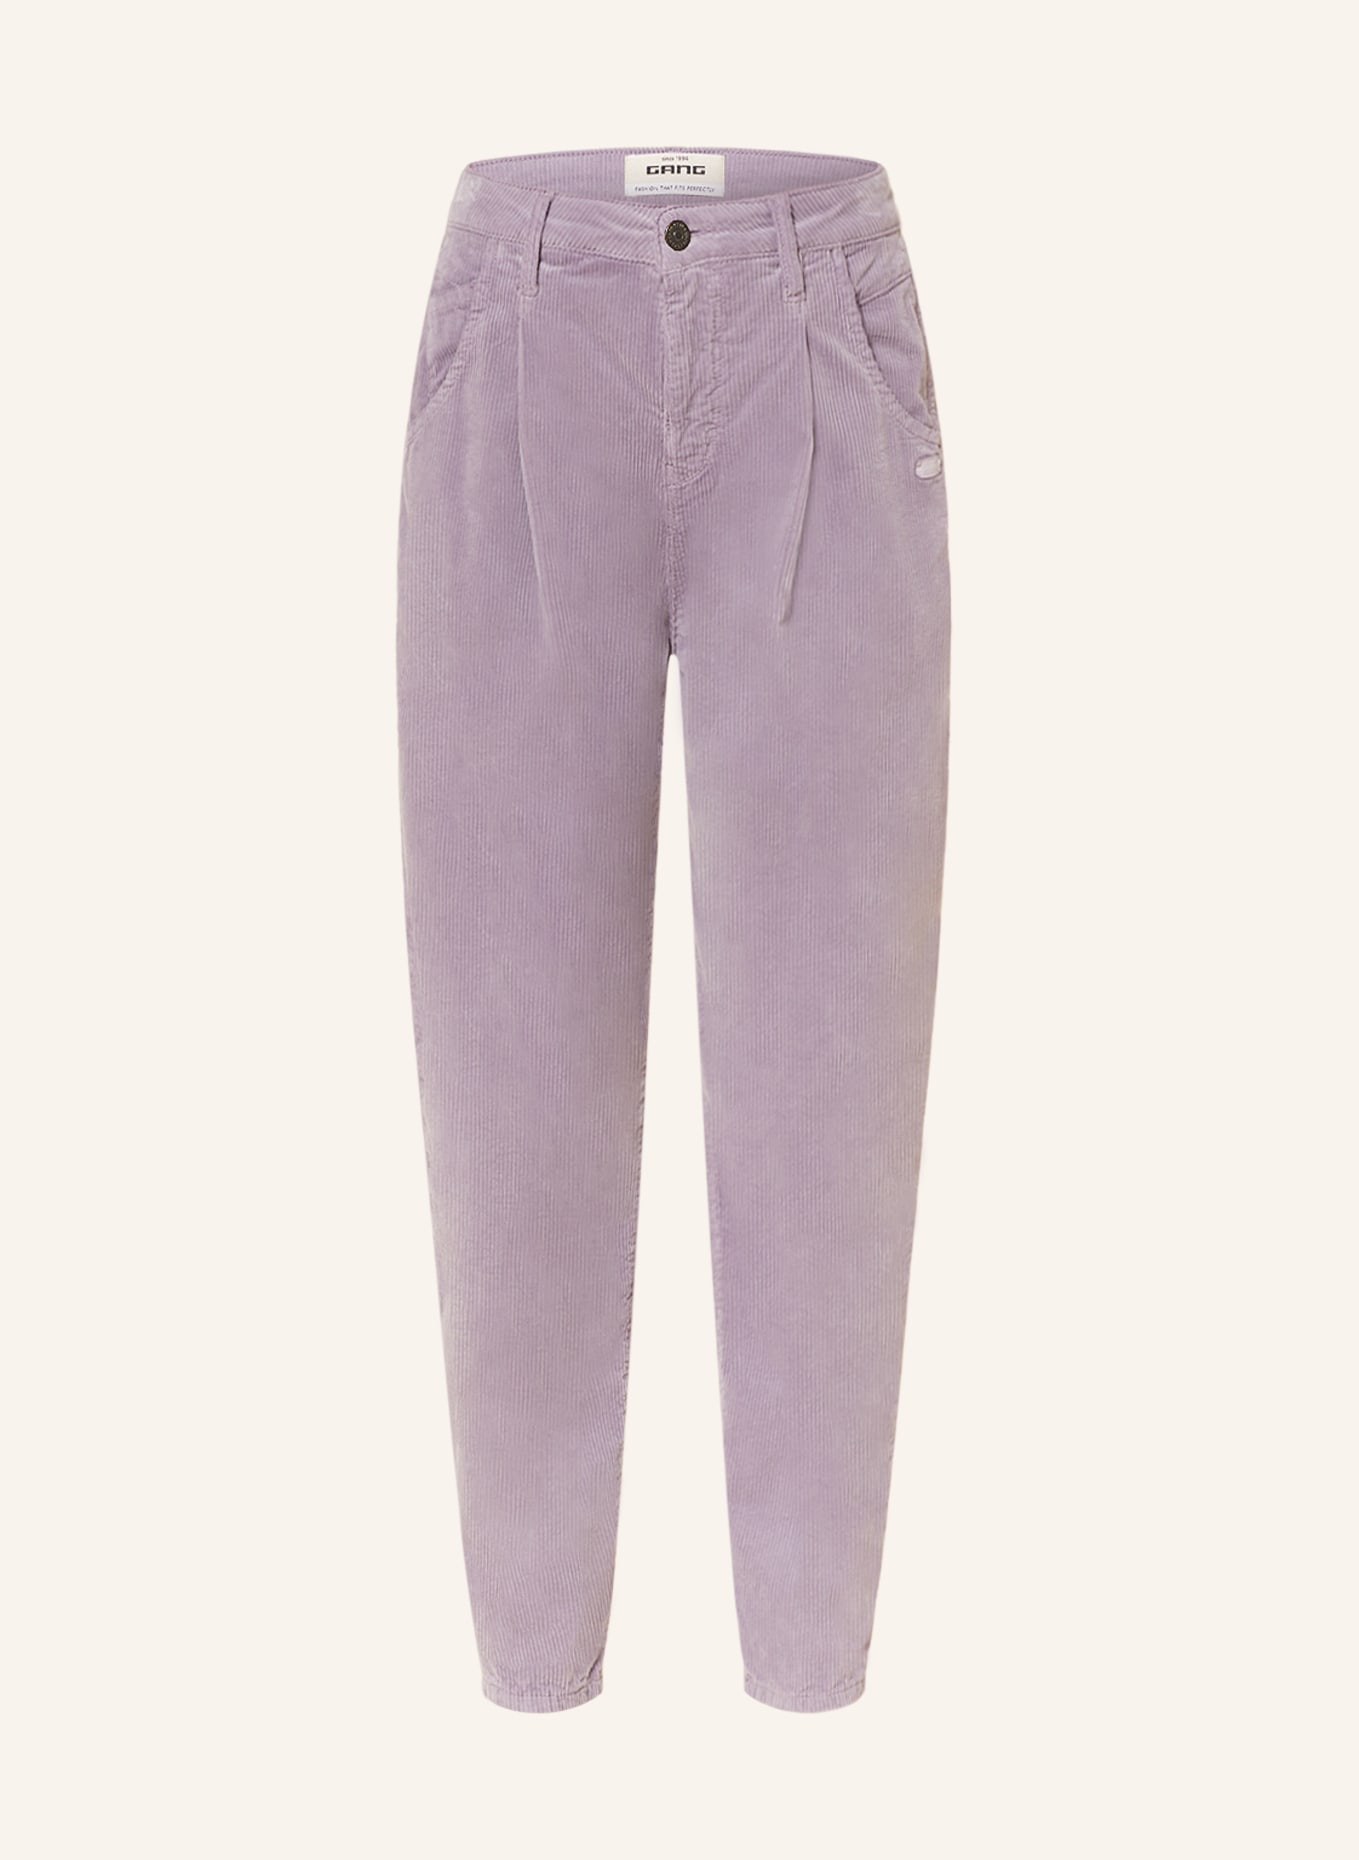 GANG 7/8 trousers SILVIA in corduroy, Color: LIGHT PURPLE (Image 1)